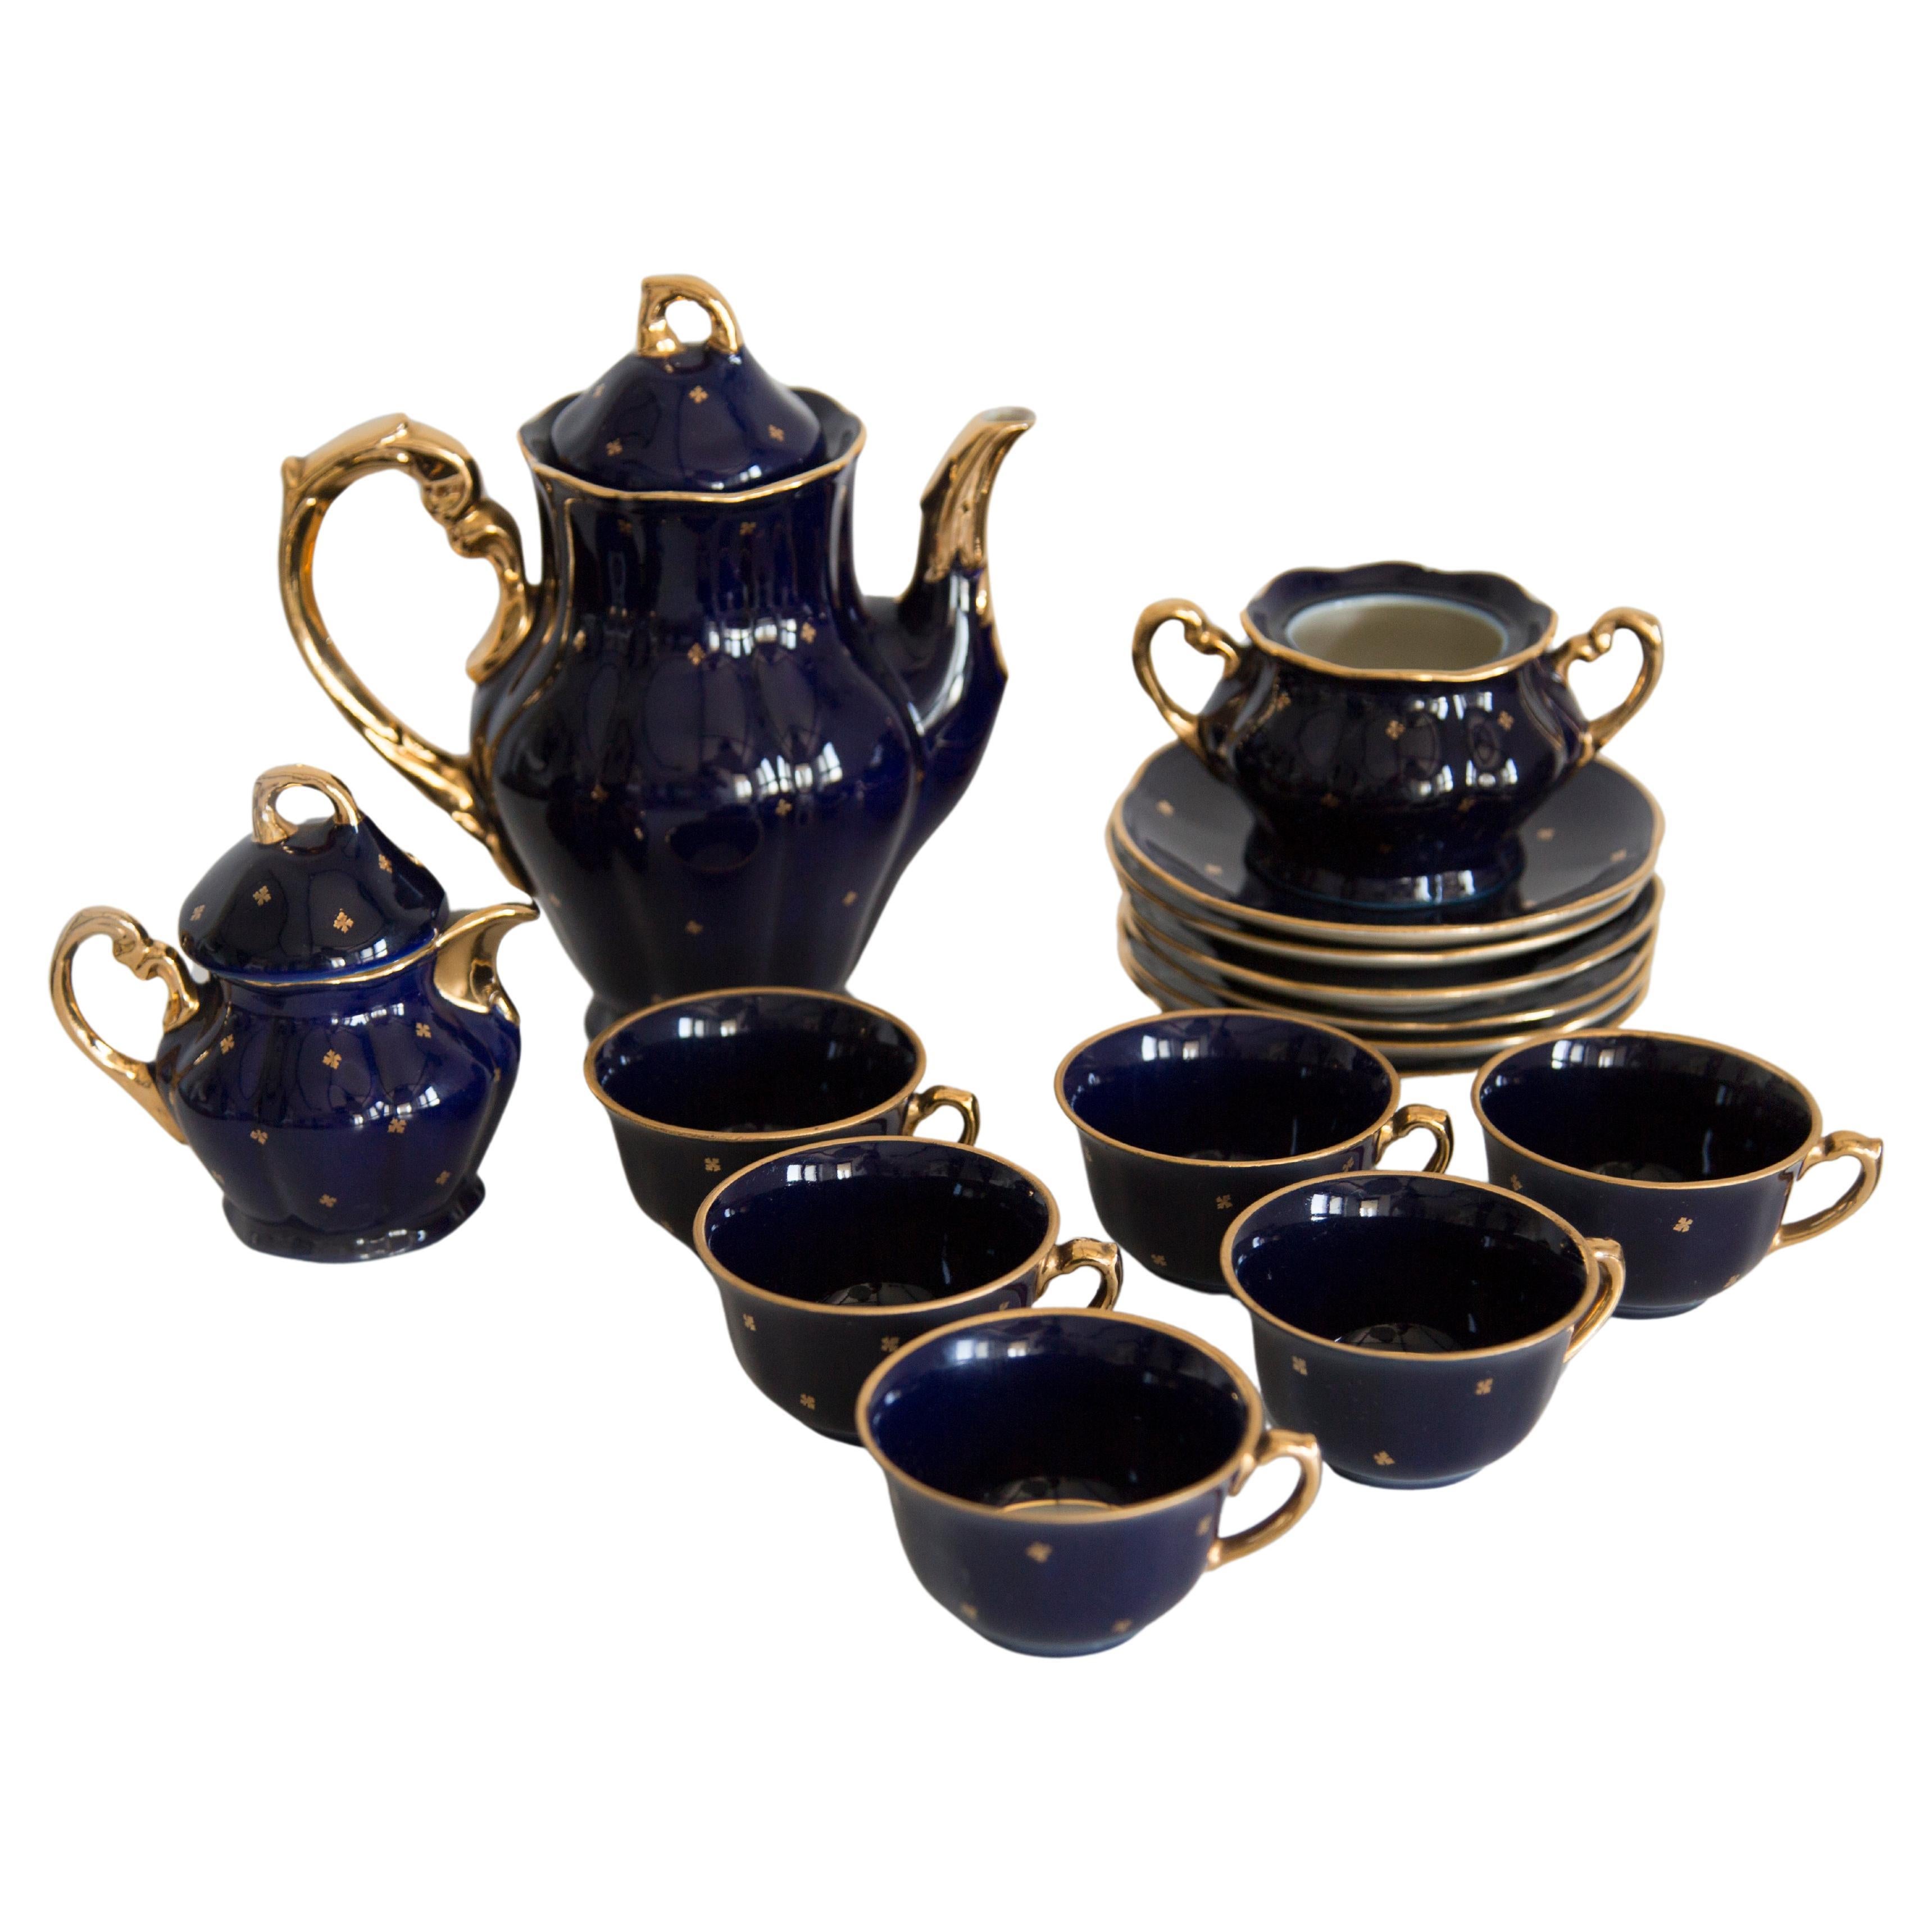 Midcentury Porcelain Navy Blue Tea Coffee Service Jug and Cups, Poland, 1960